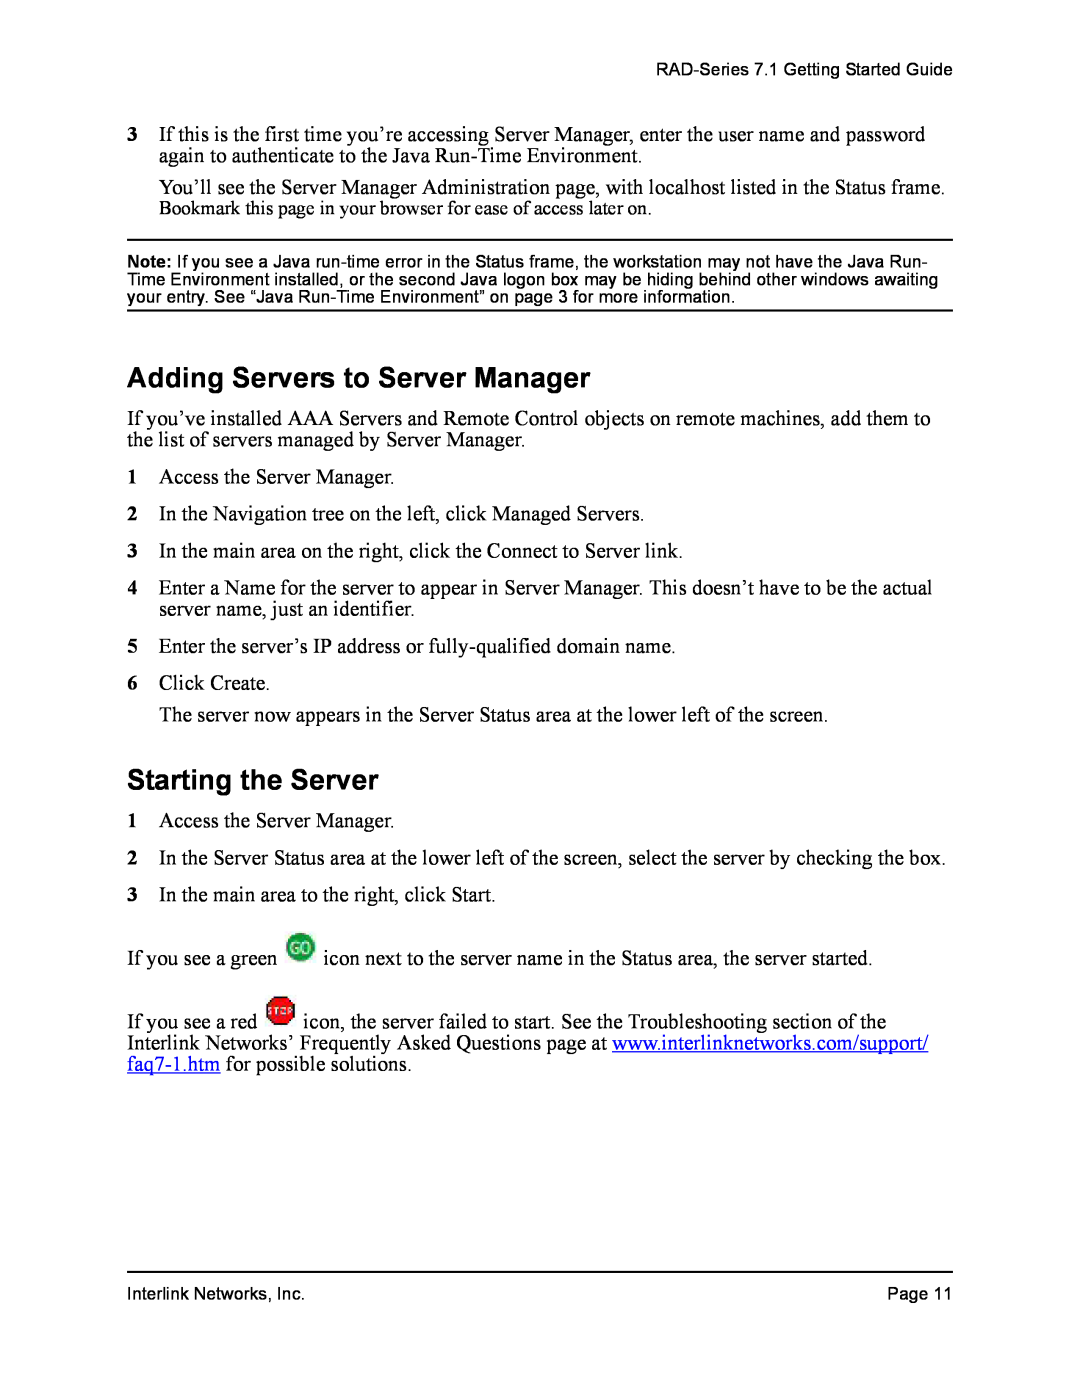 Interlink electronic 7.1 manual Adding Servers to Server Manager, Starting the Server 